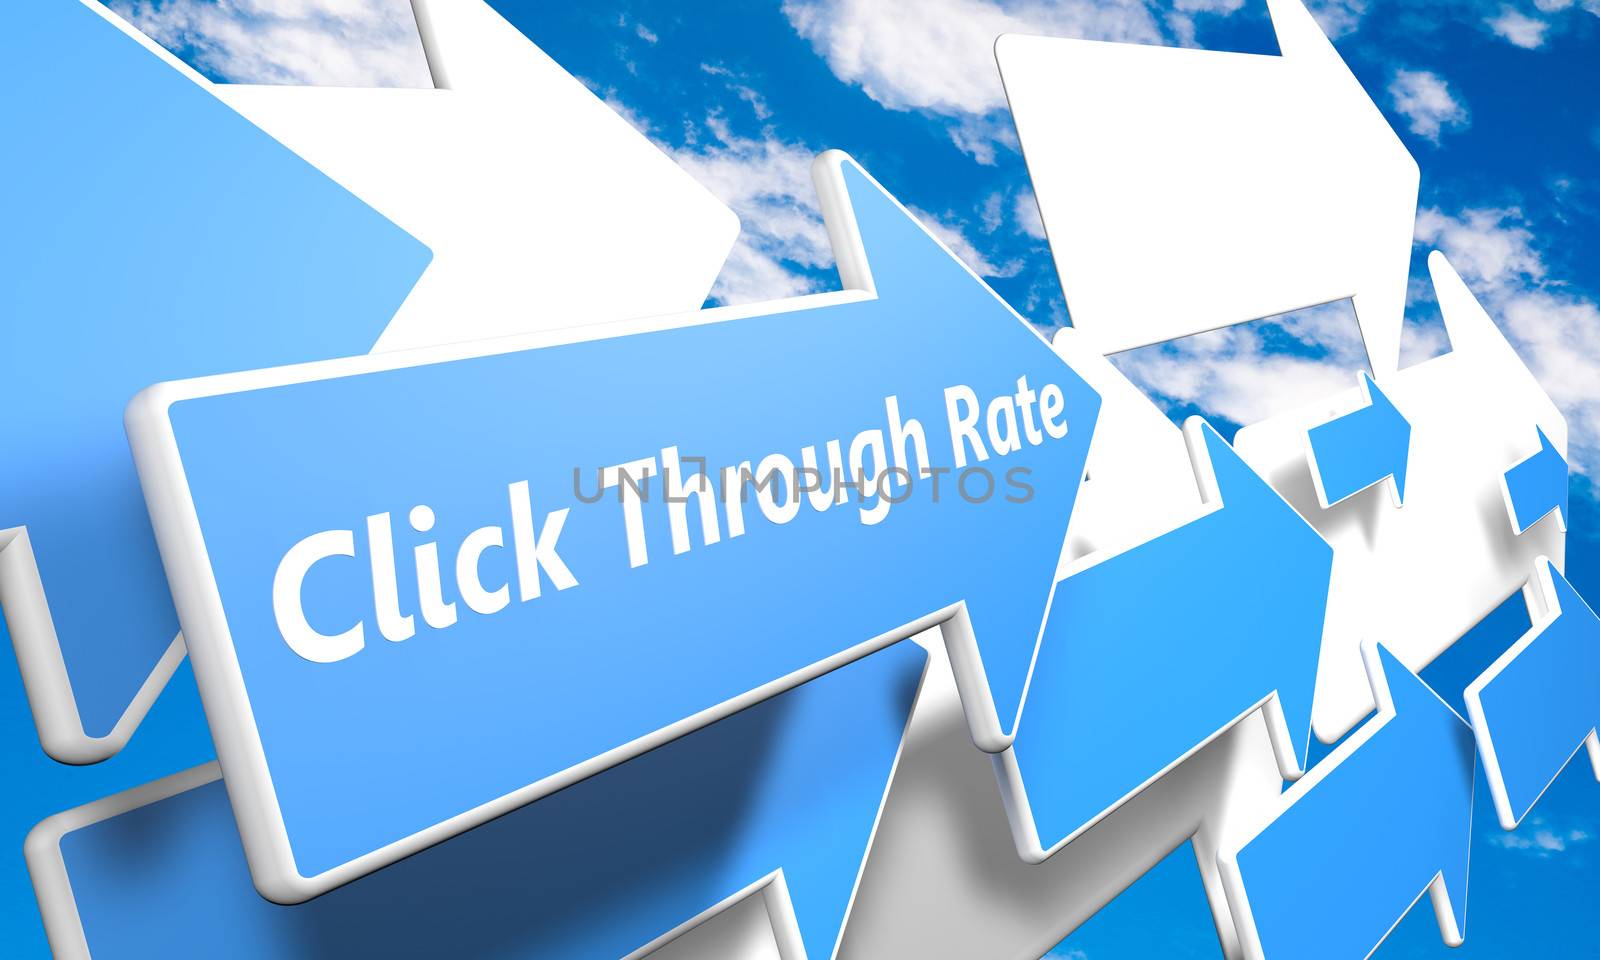 Click Through Rate 3d render concept with blue and white arrows flying in a blue sky with clouds